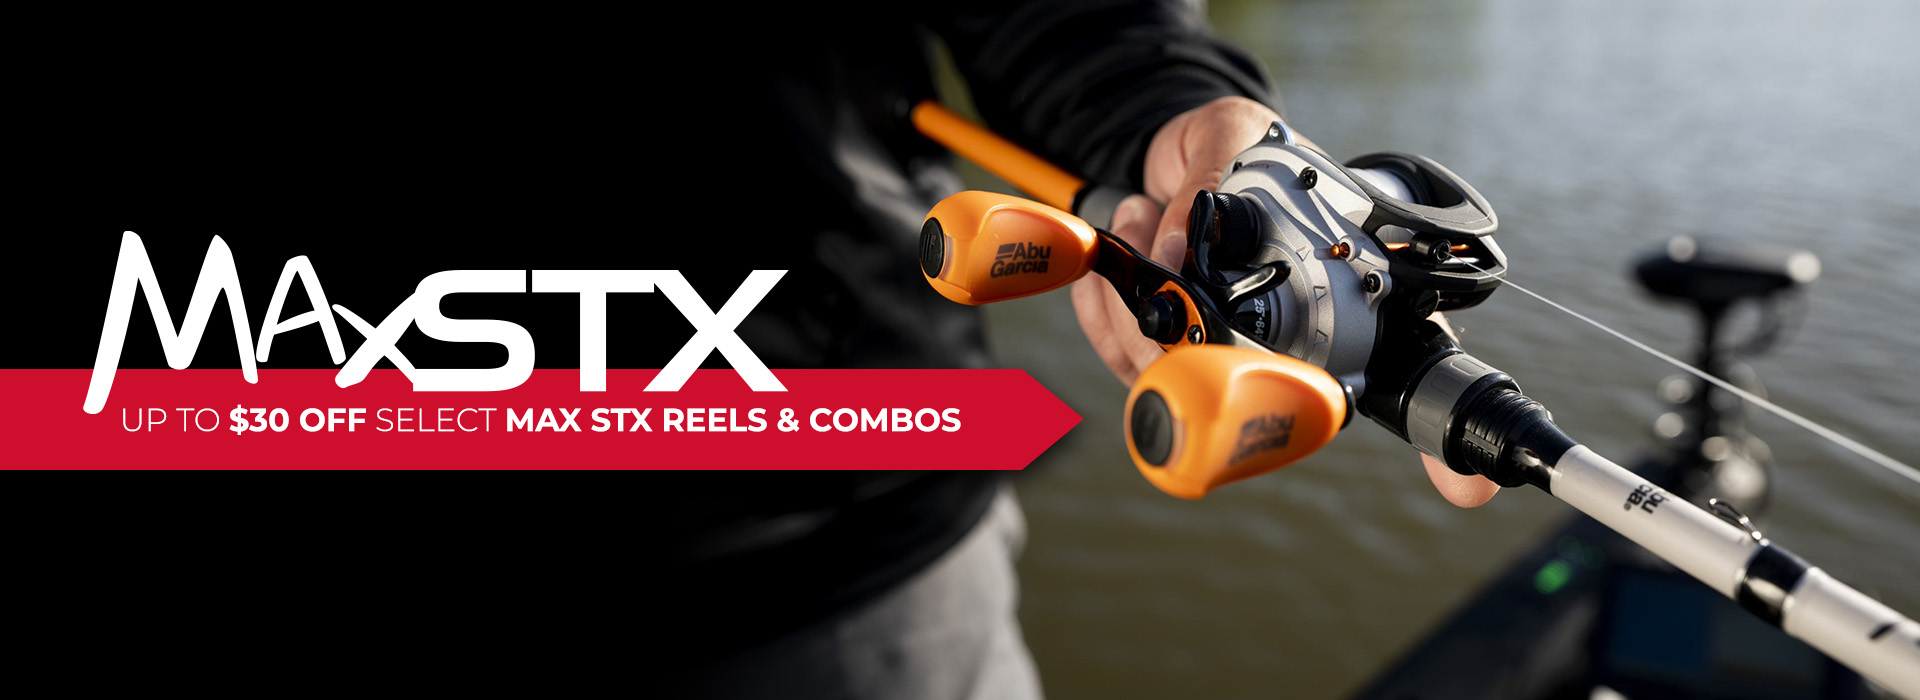 Up to $30 off select Max STX Reels & Combos